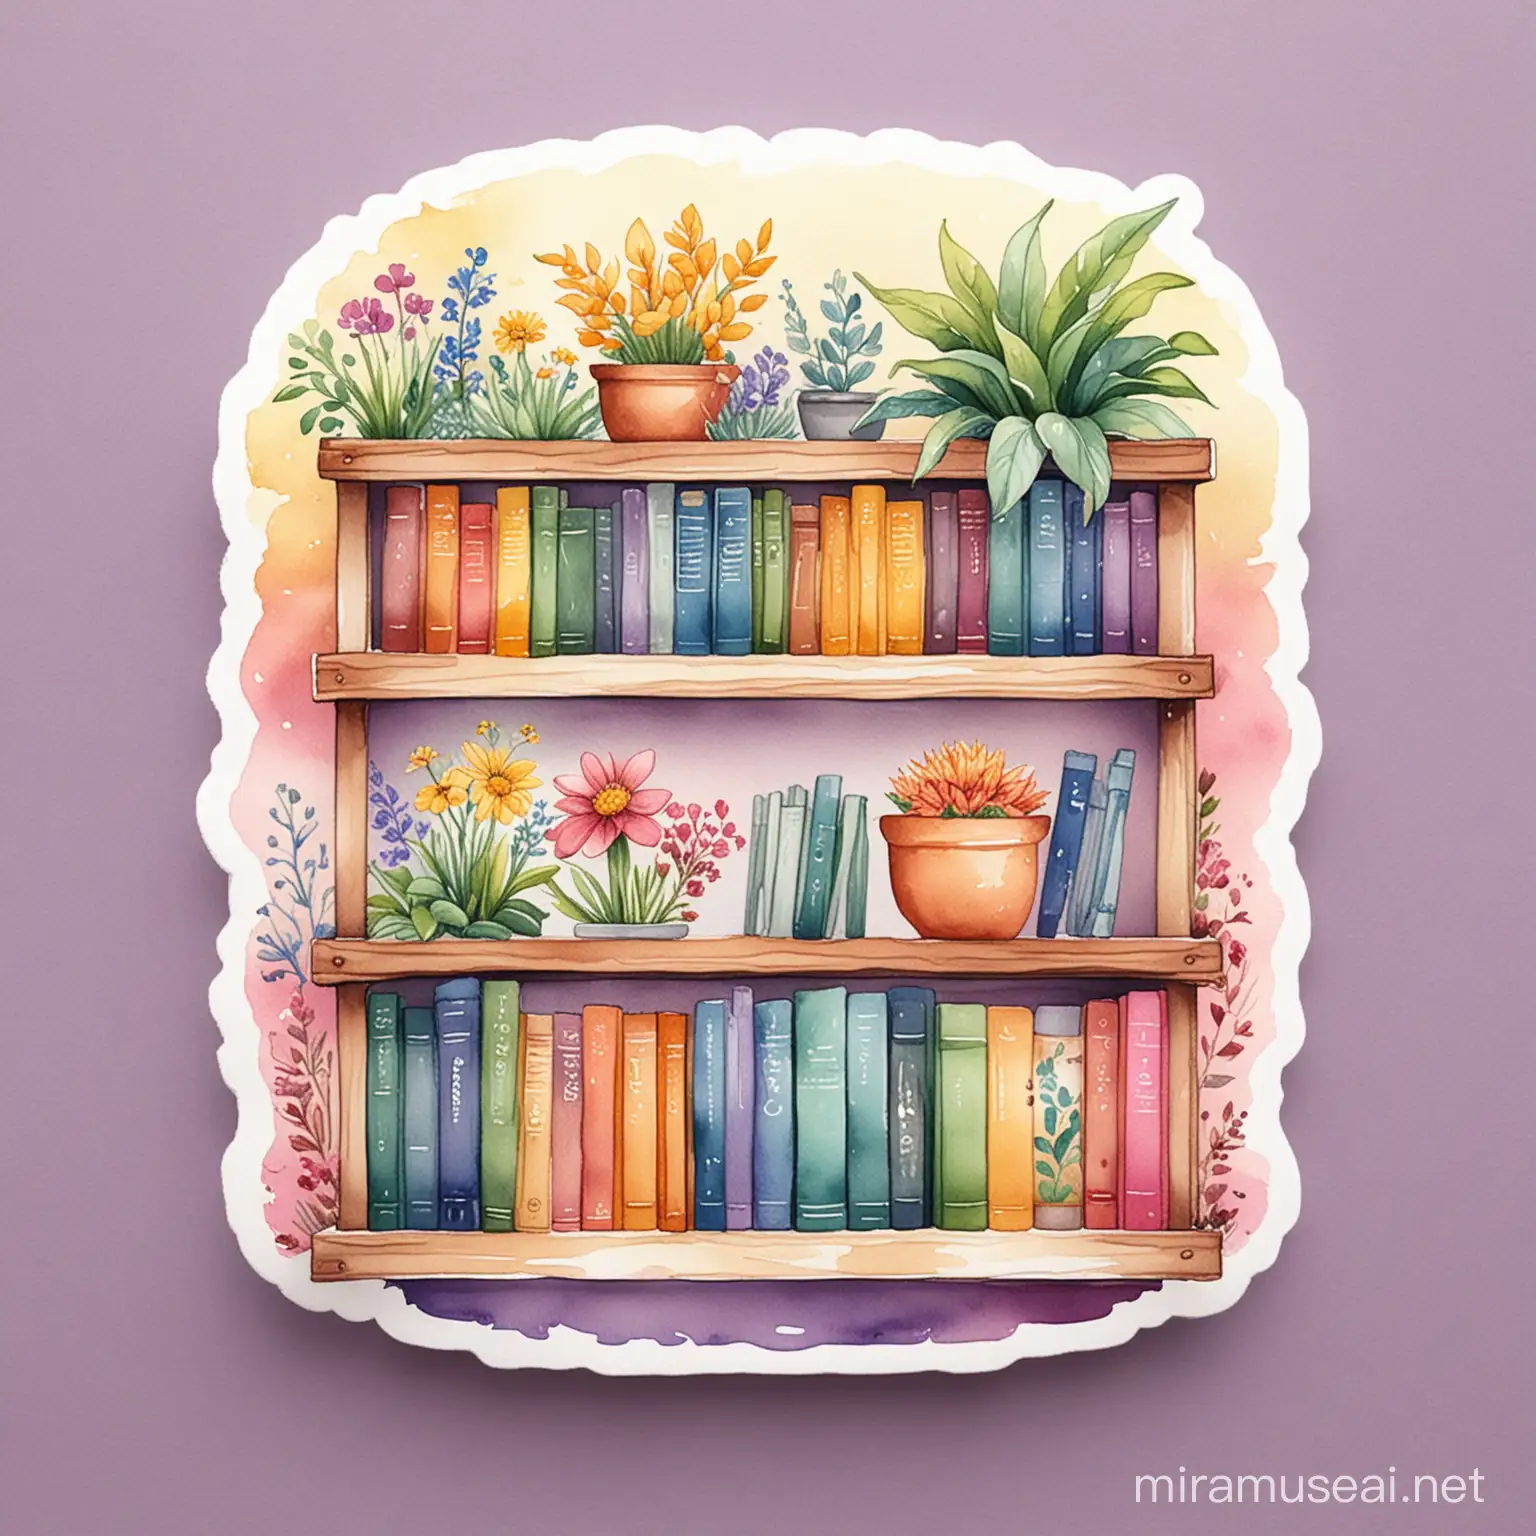 A higher quality watercolor illustration sticker of small book shelves , plants flowers in around , in acenter position, watercolor painting style format, use pink, blue, yellow,  orange,  violet, green watercolors 